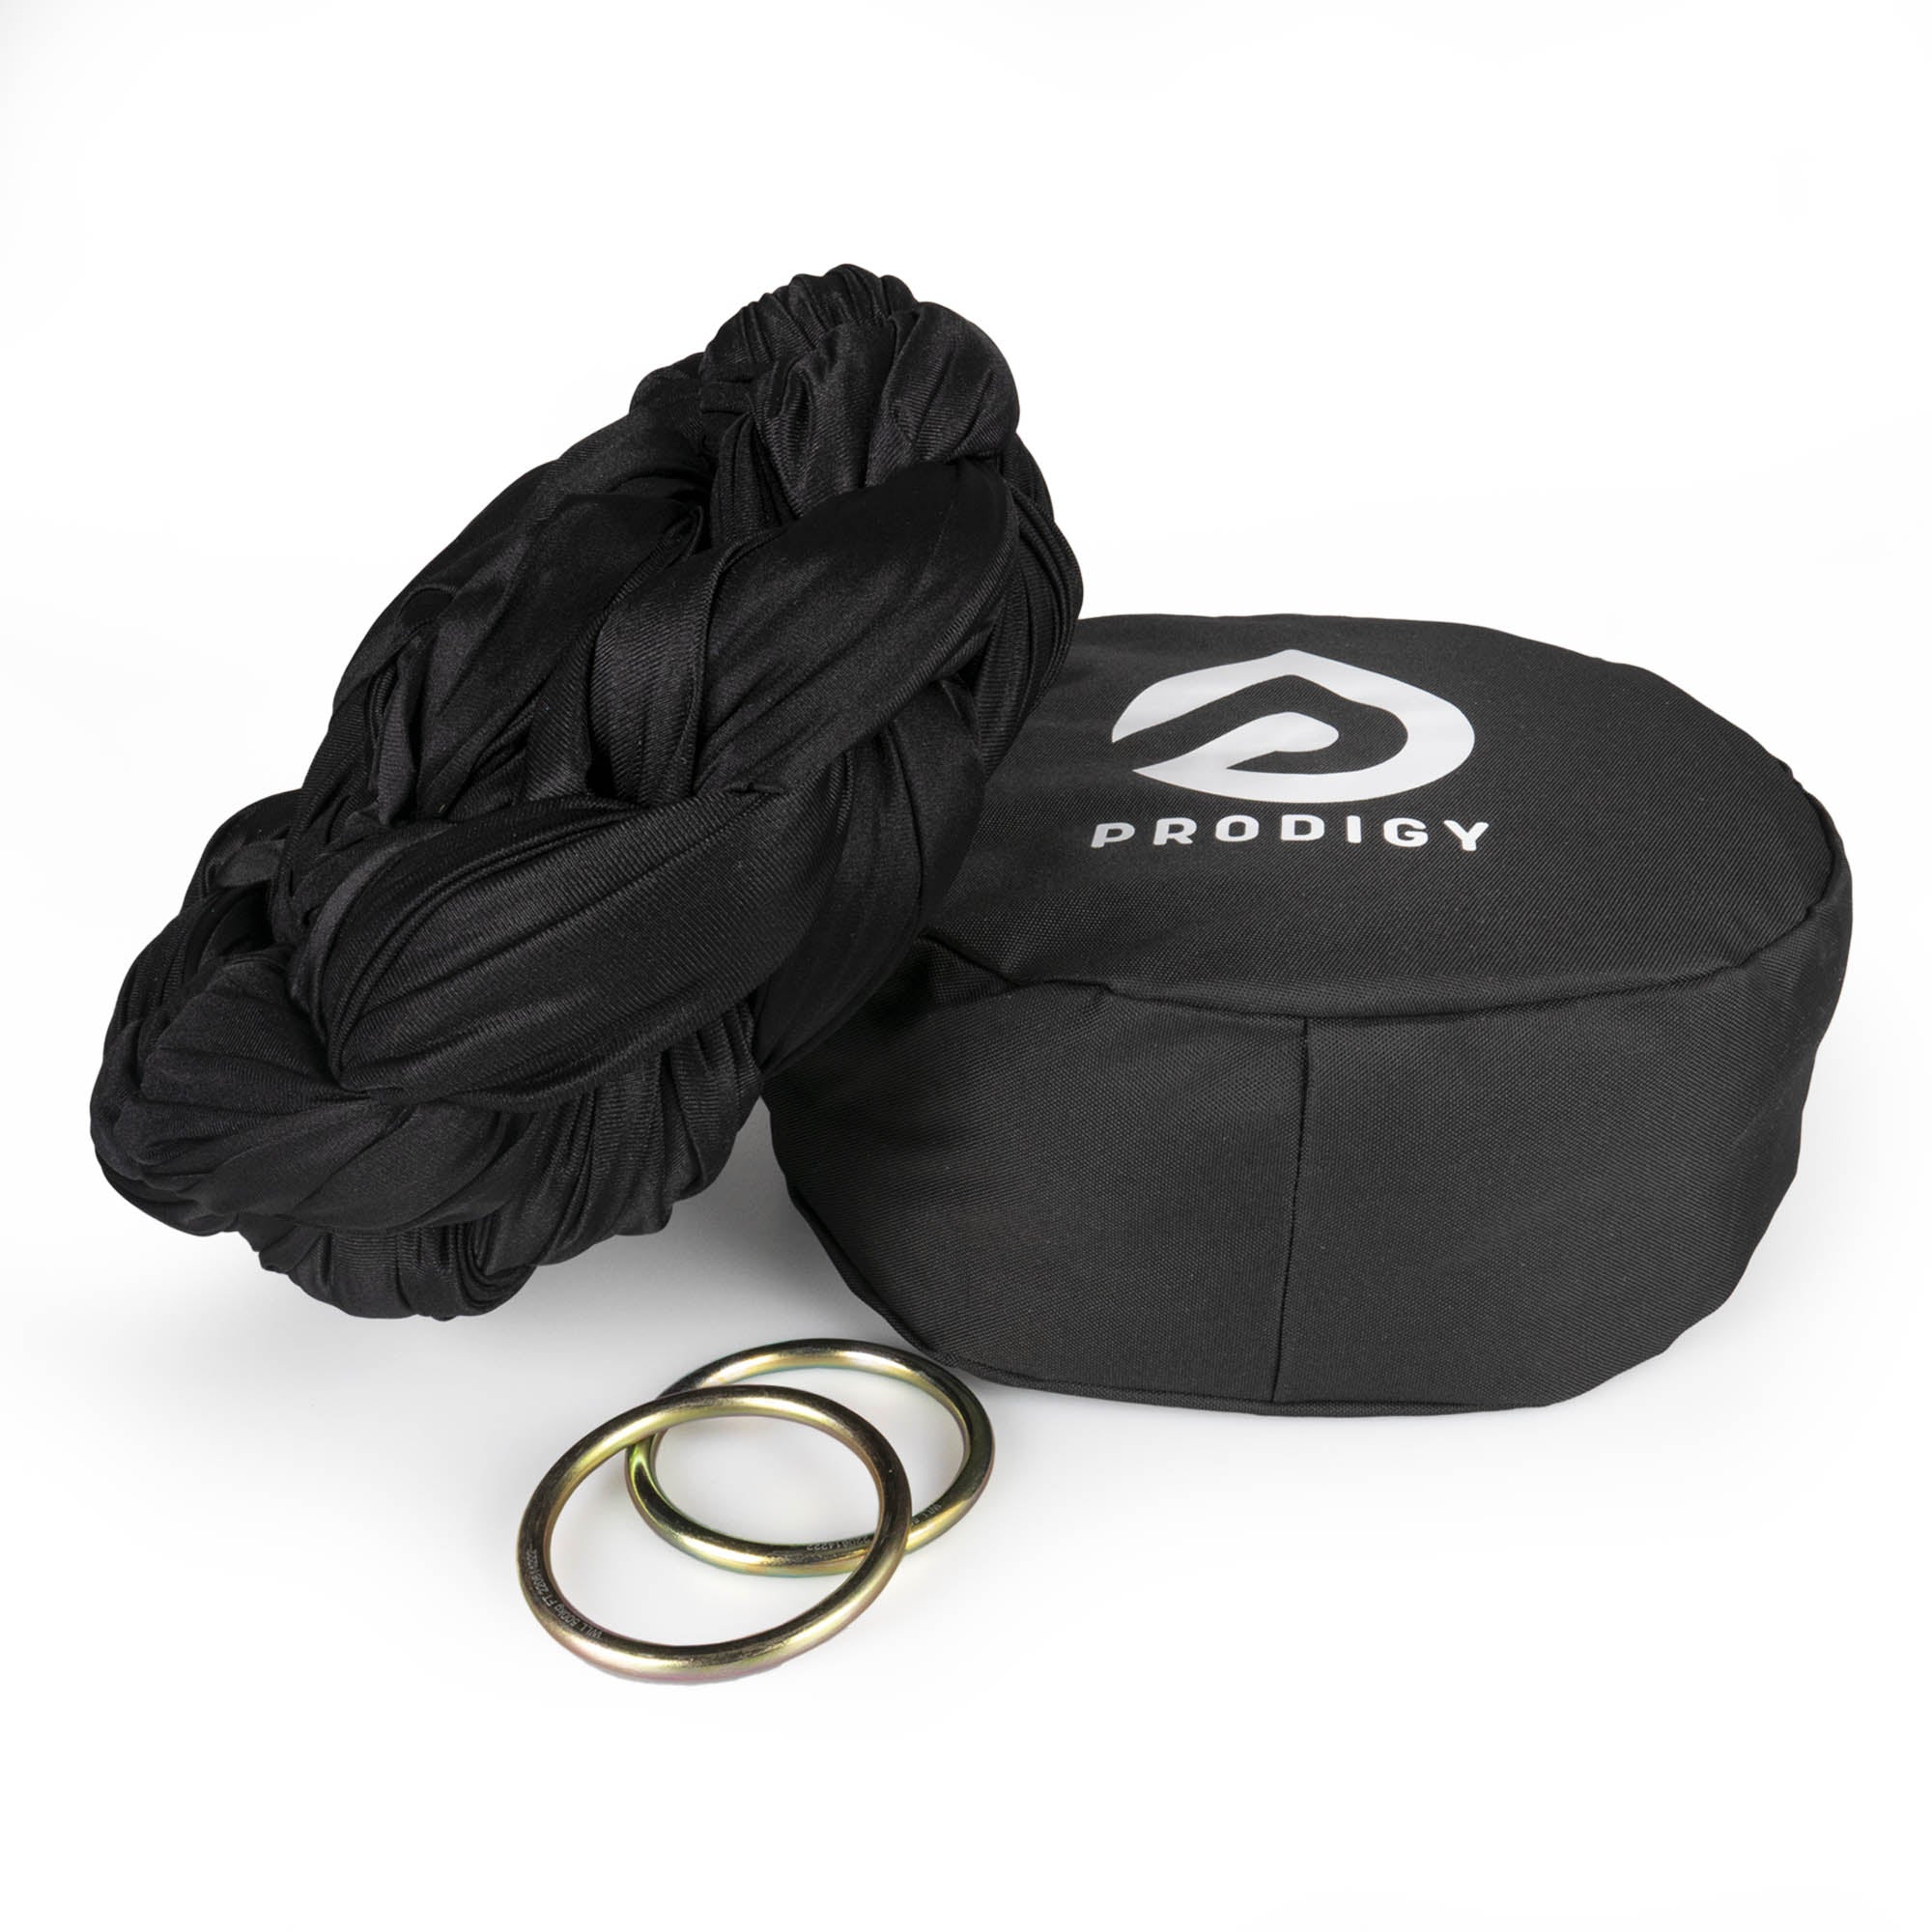 Prodigy 6m black aerial yoga hammock resting on hammock bag with the rings